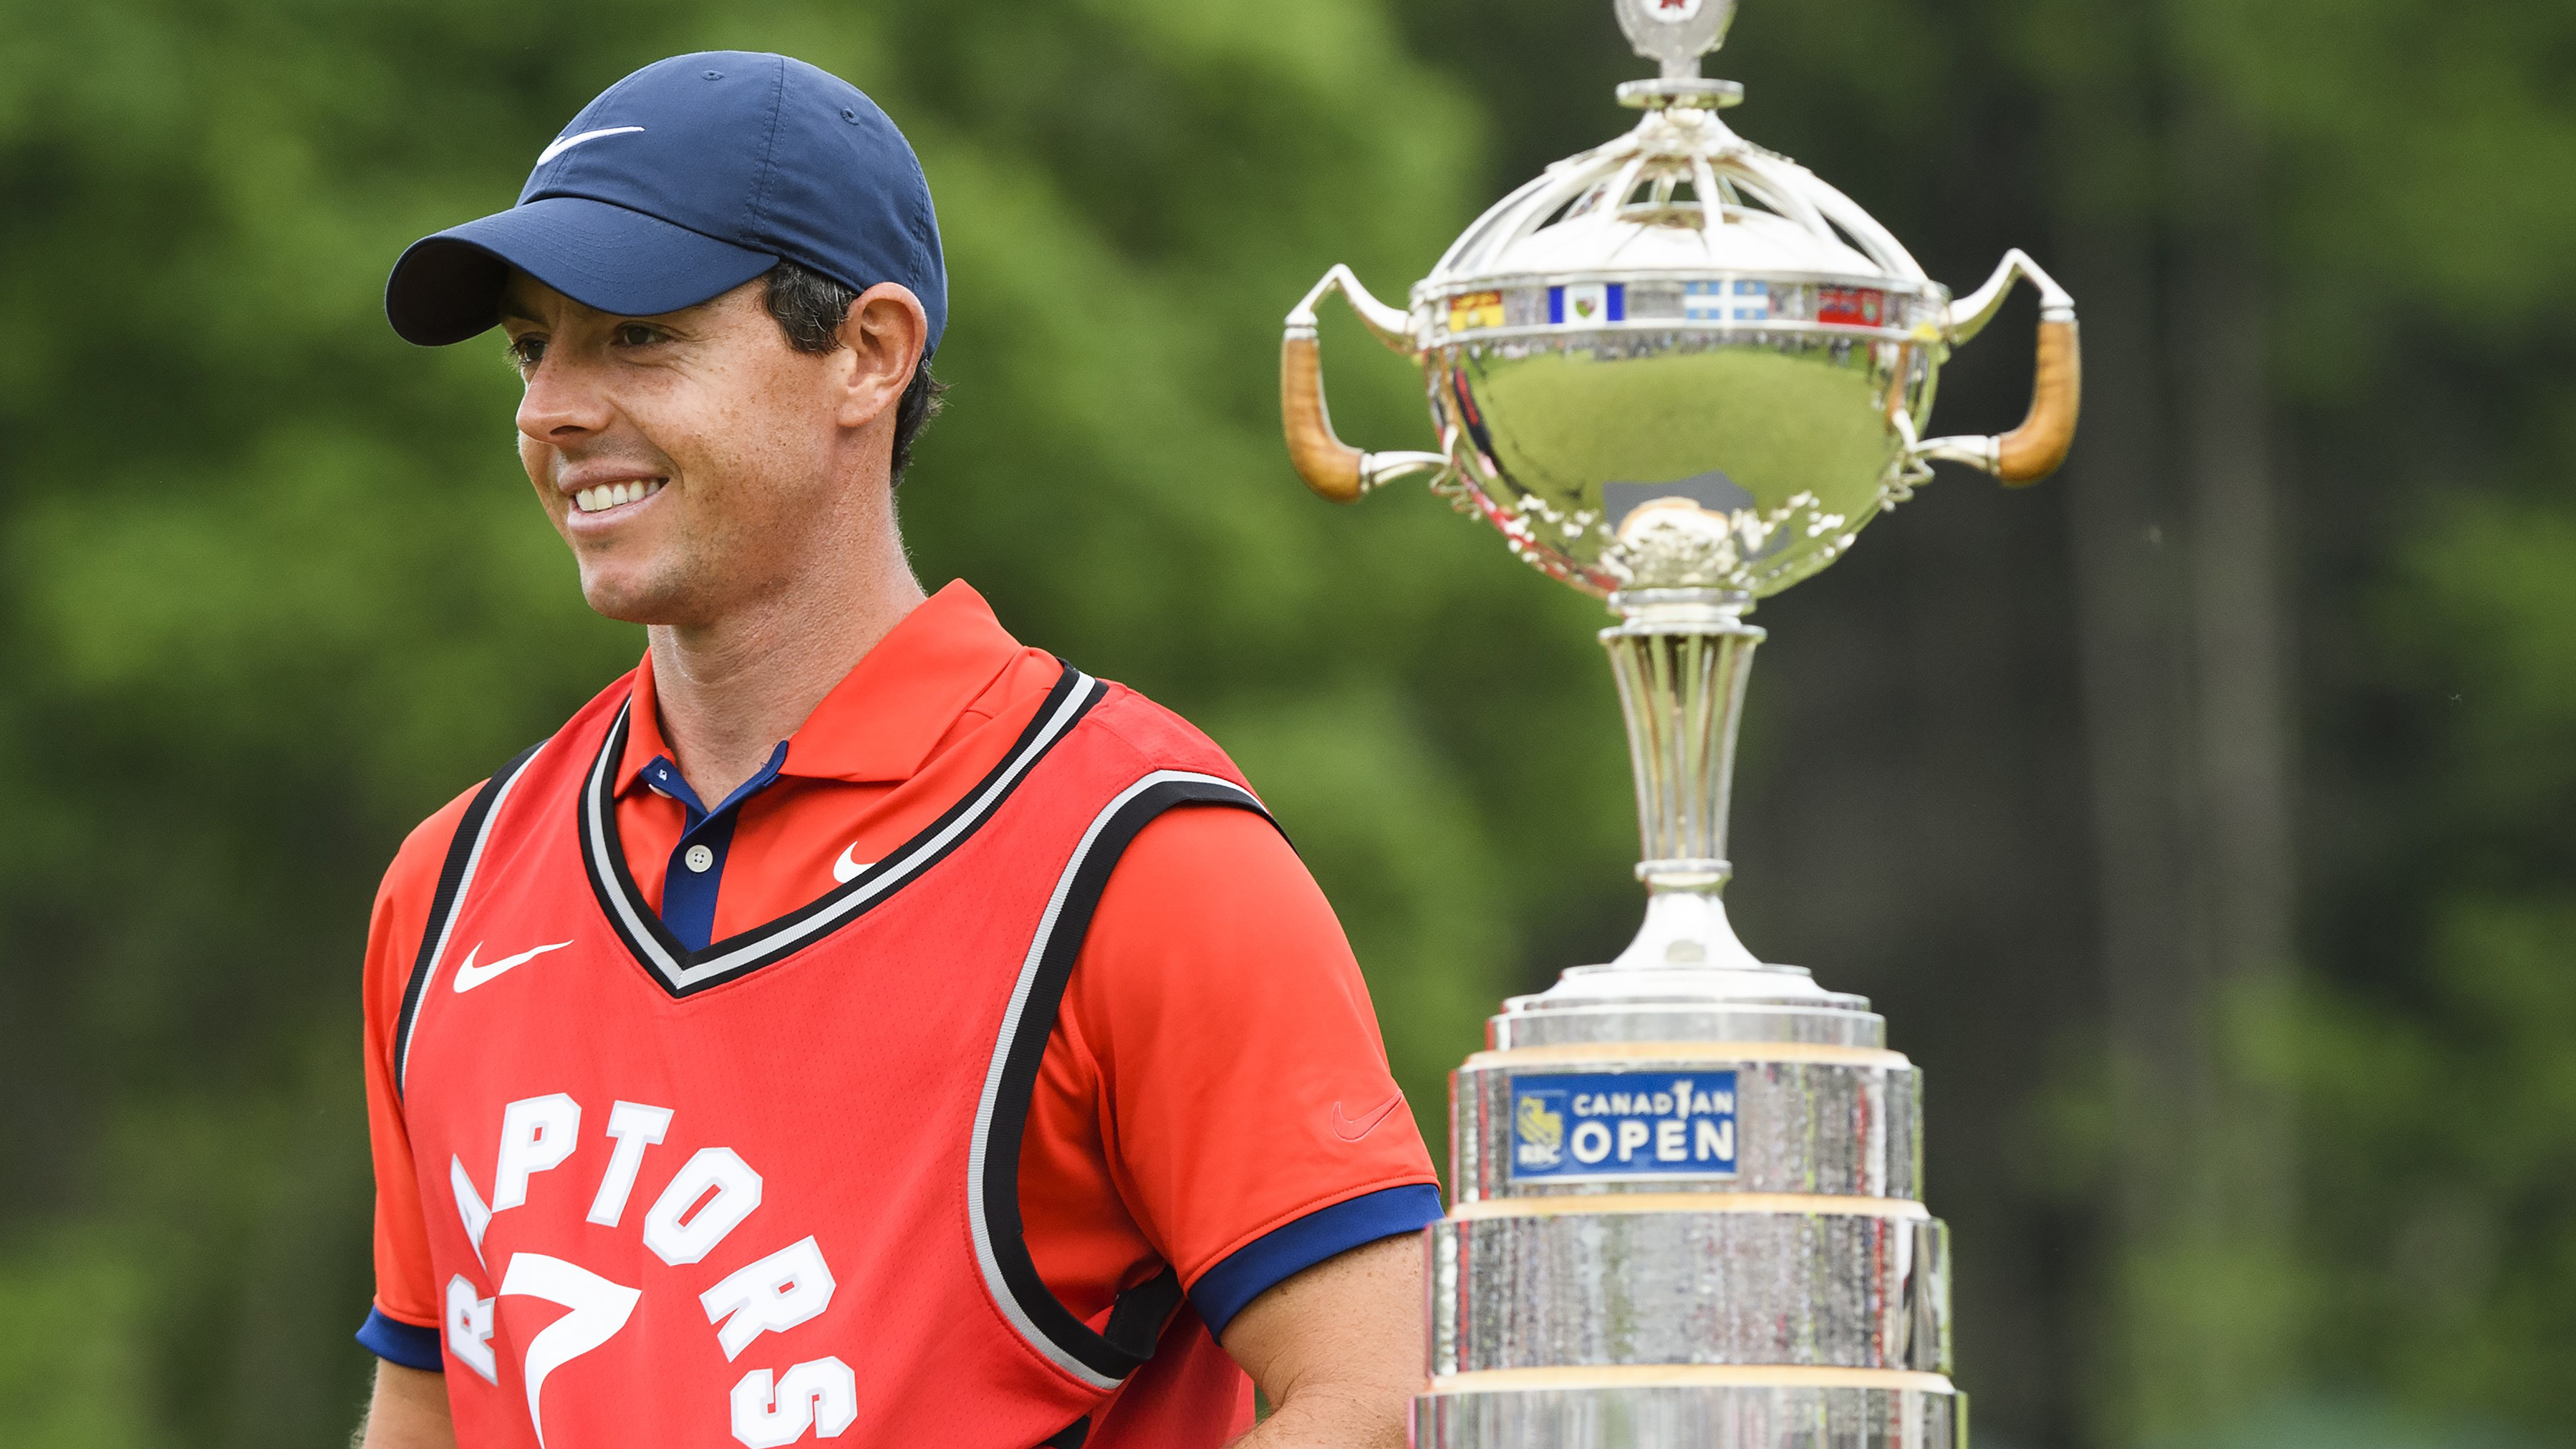 Rory McIlroy flirts with 59, wins RBC Canadian Open by 7 strokes